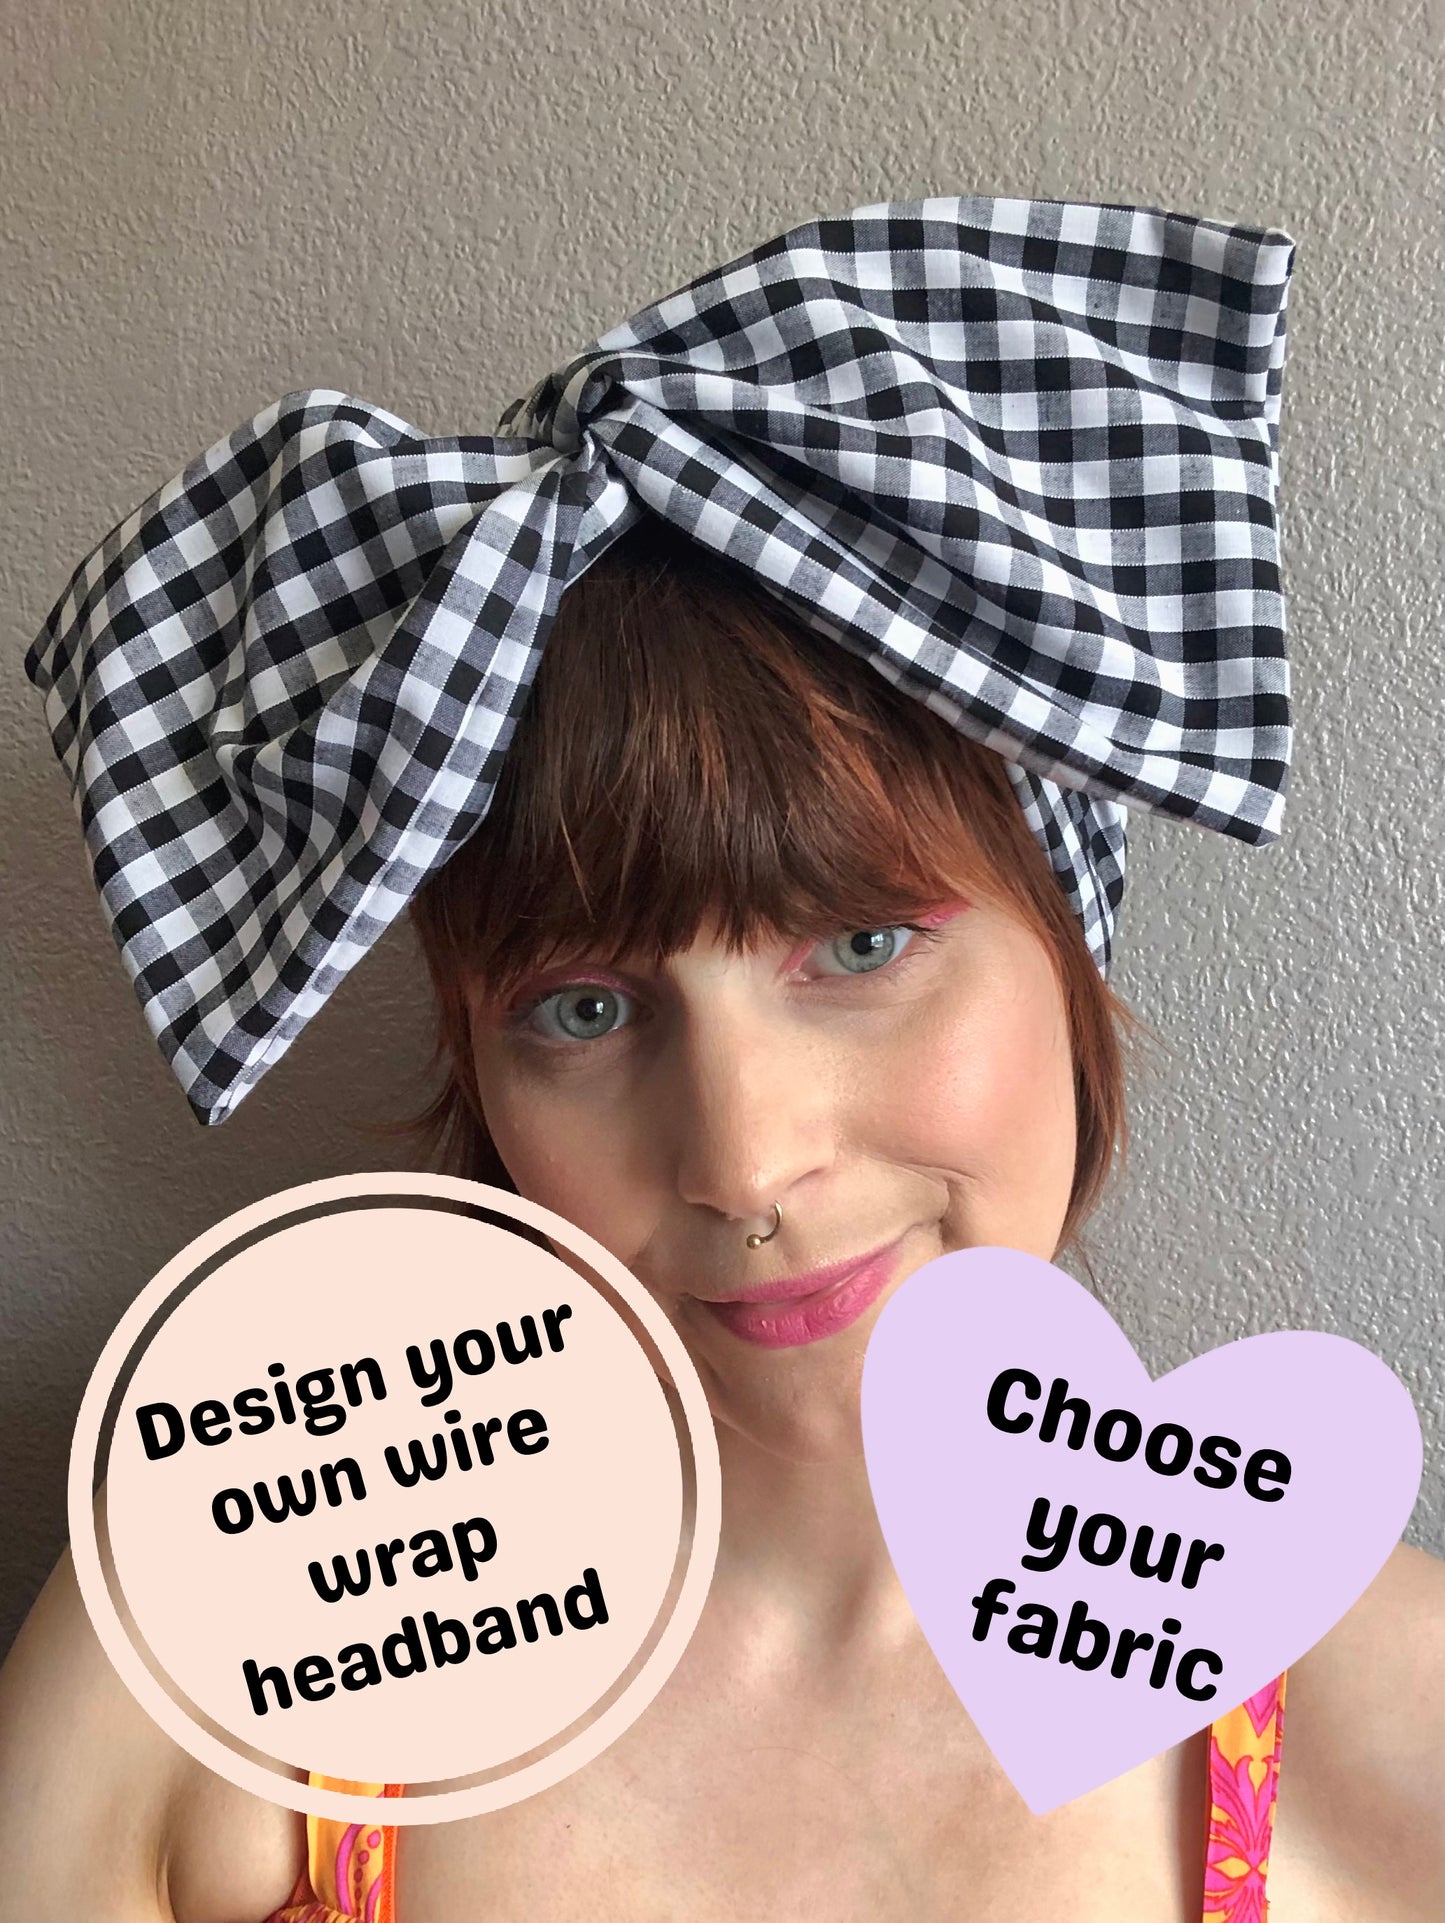 Design your own wire wrap headband - choose fabric!